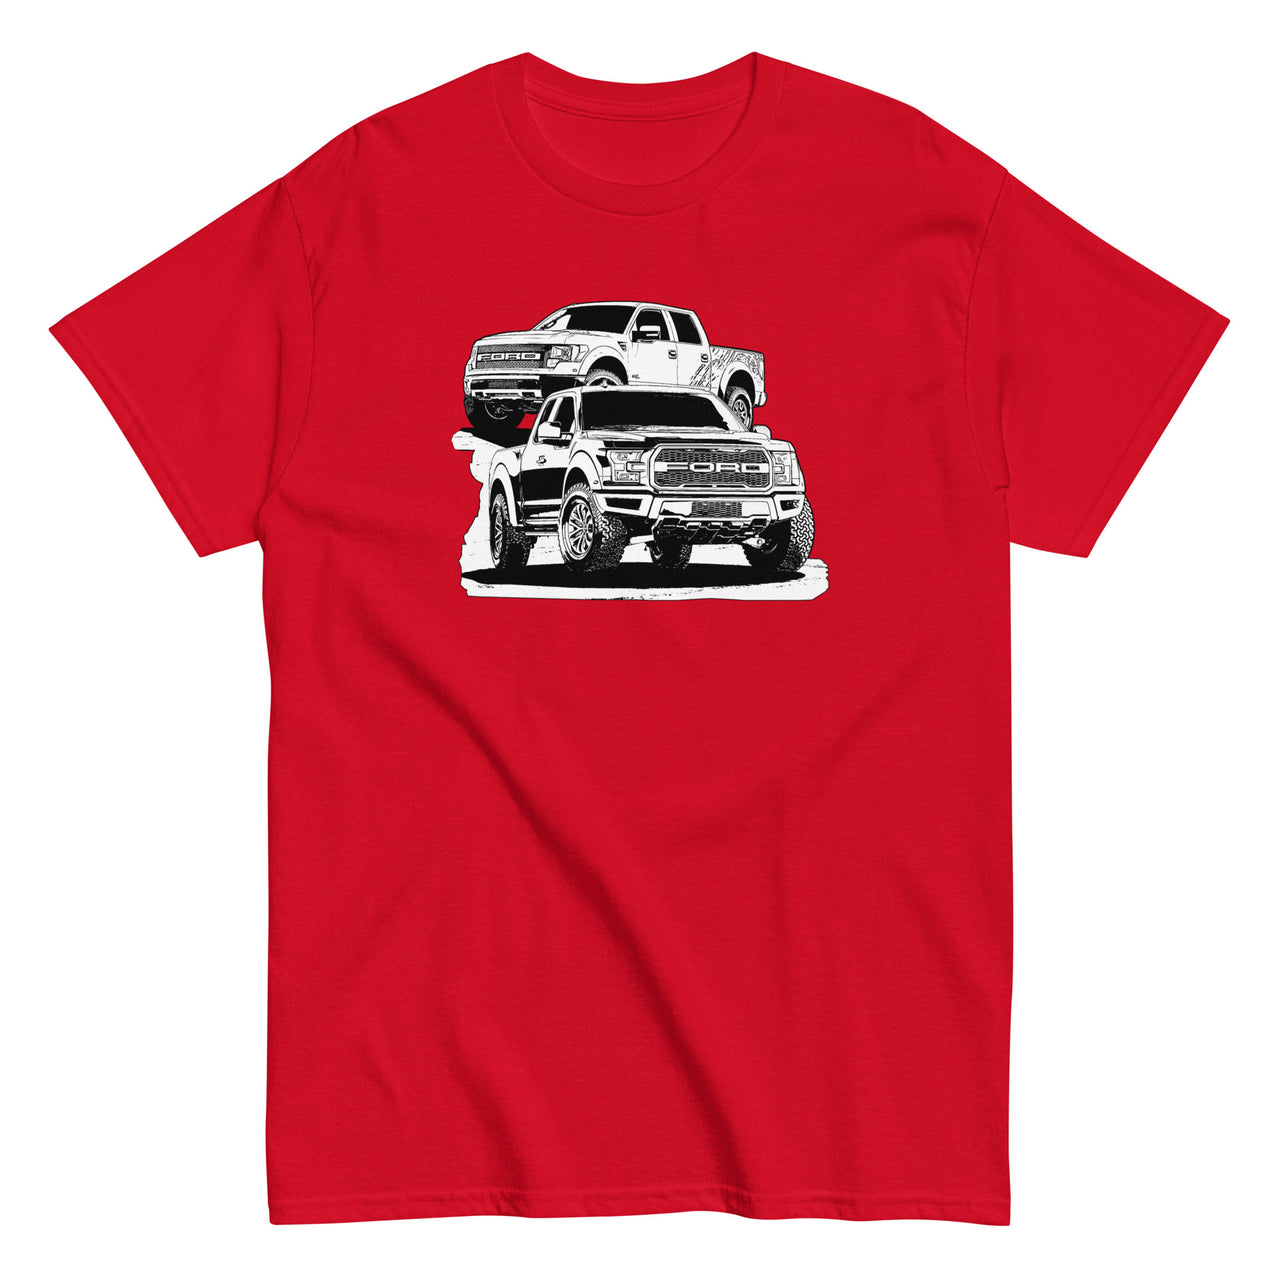 Raptor Truck T-Shirt in red